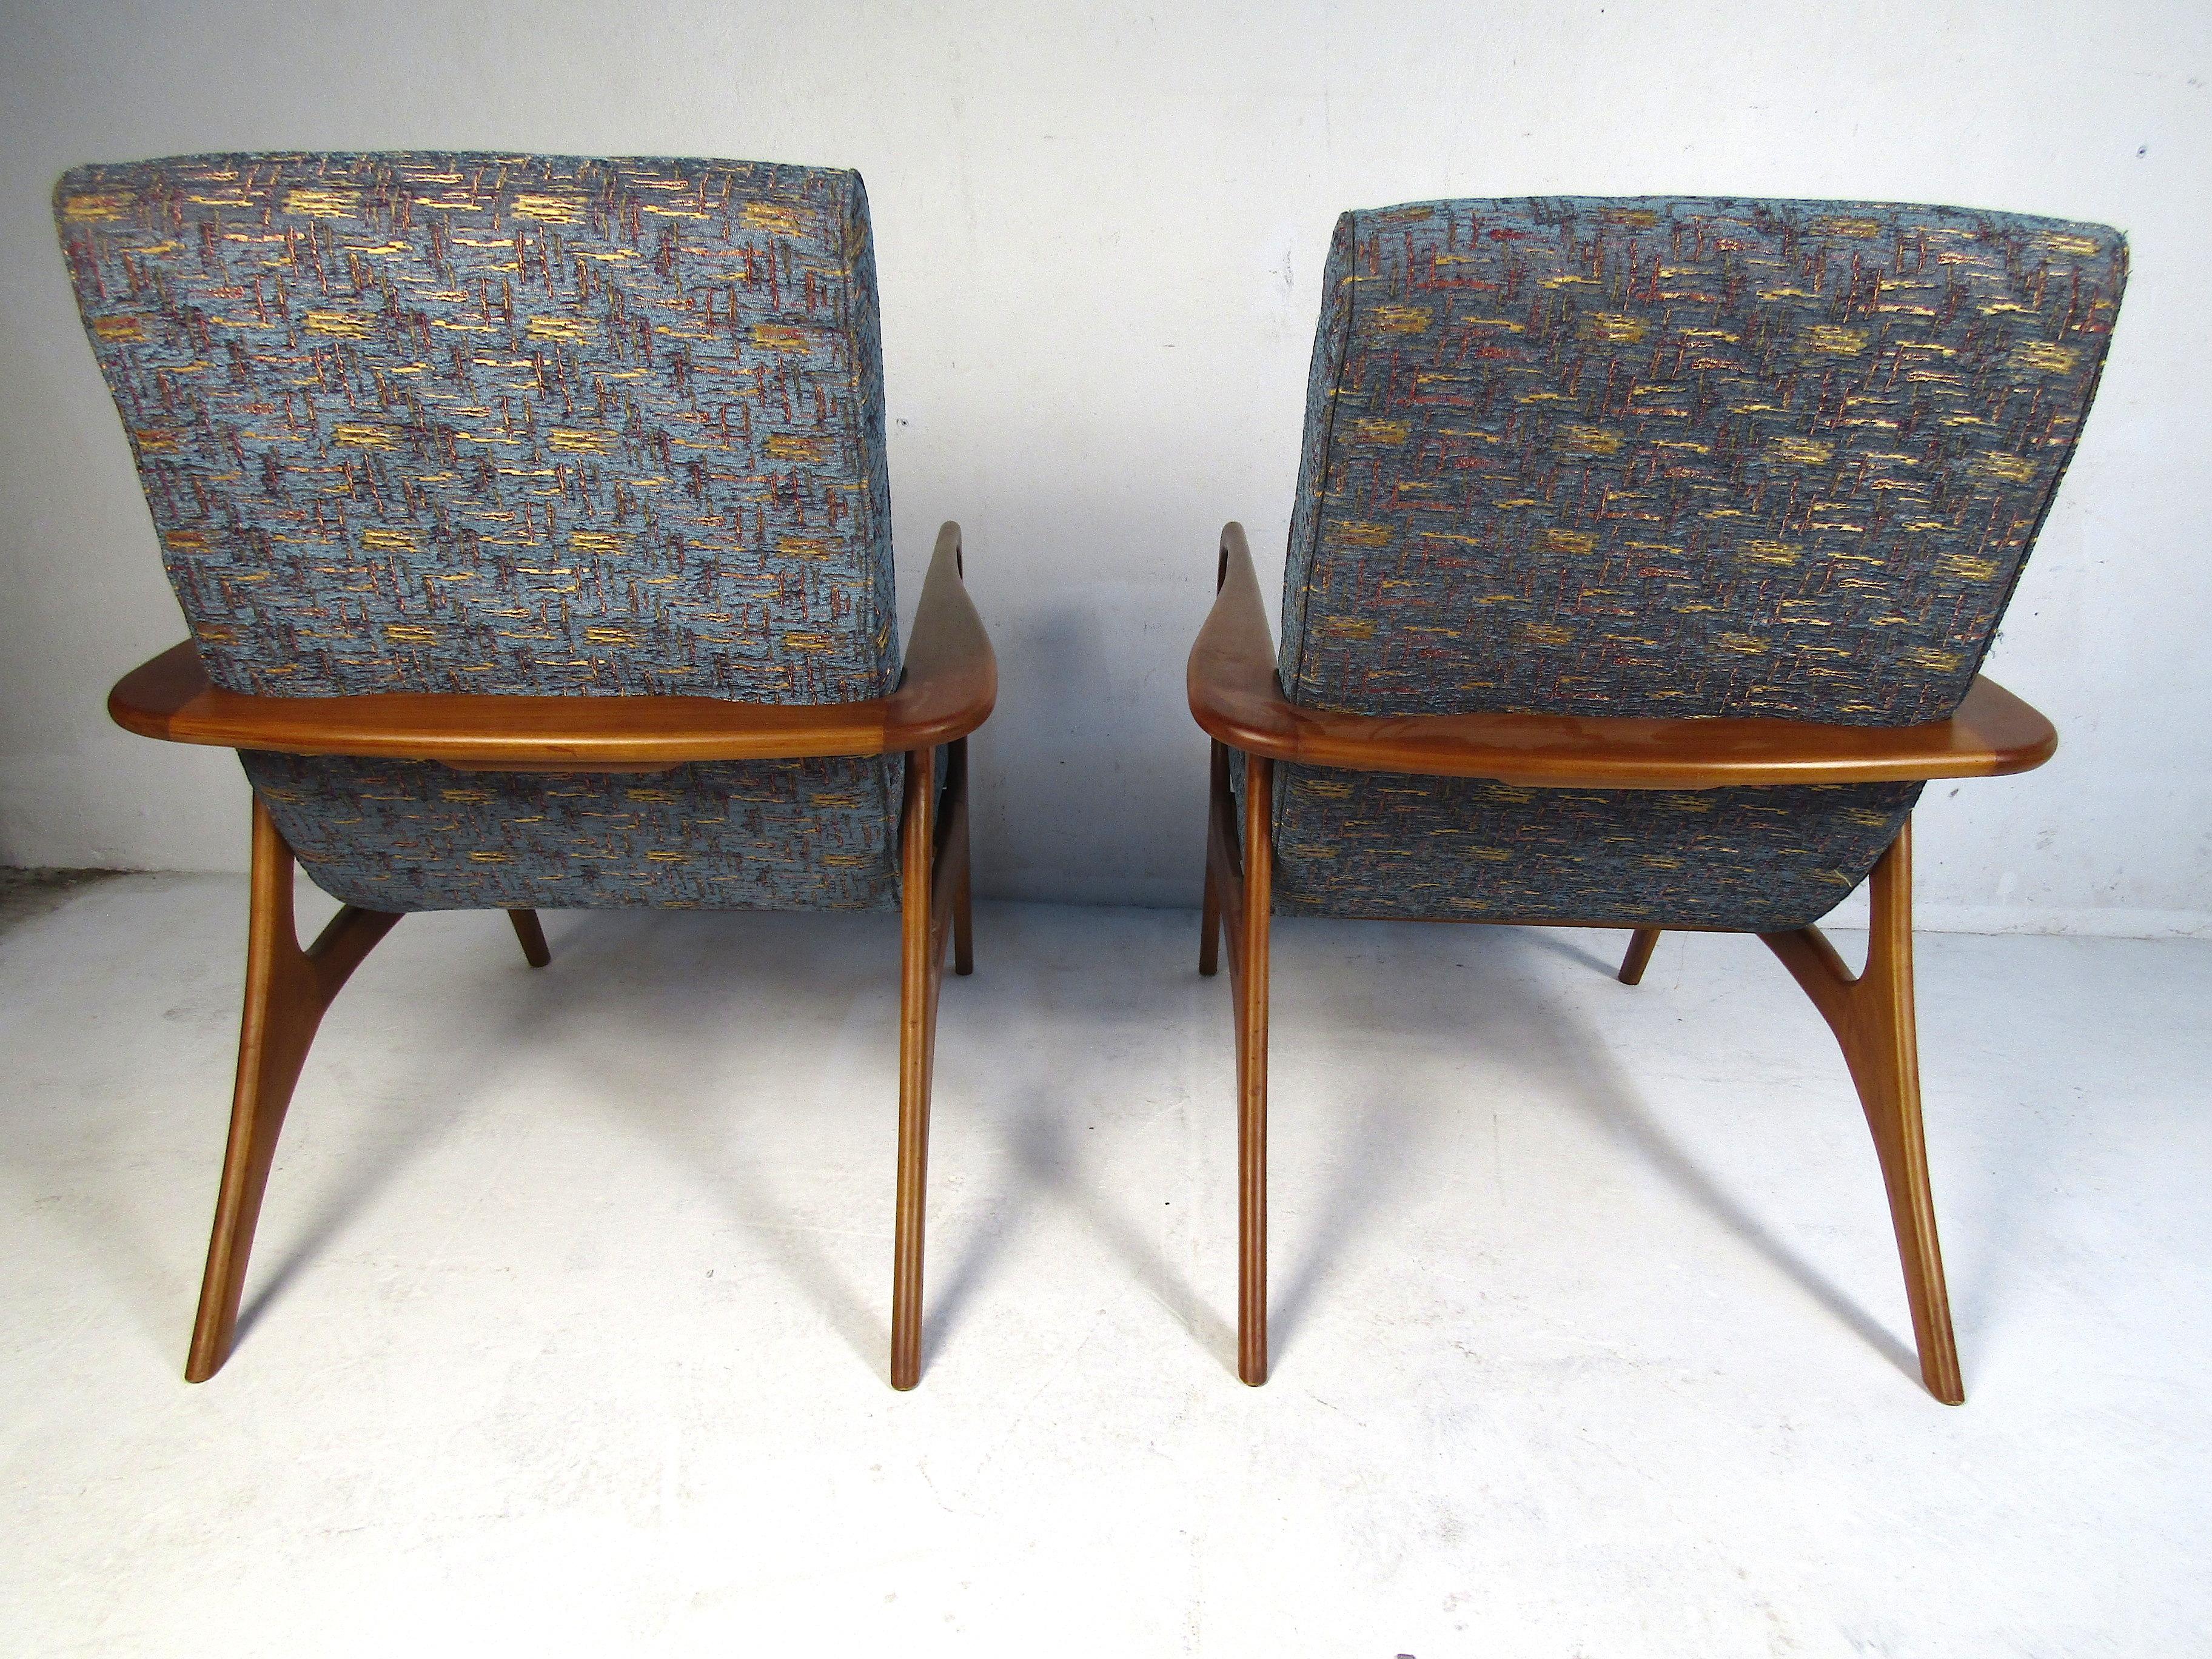 Upholstery Pair of Mid-Century Modern Lounge Chairs